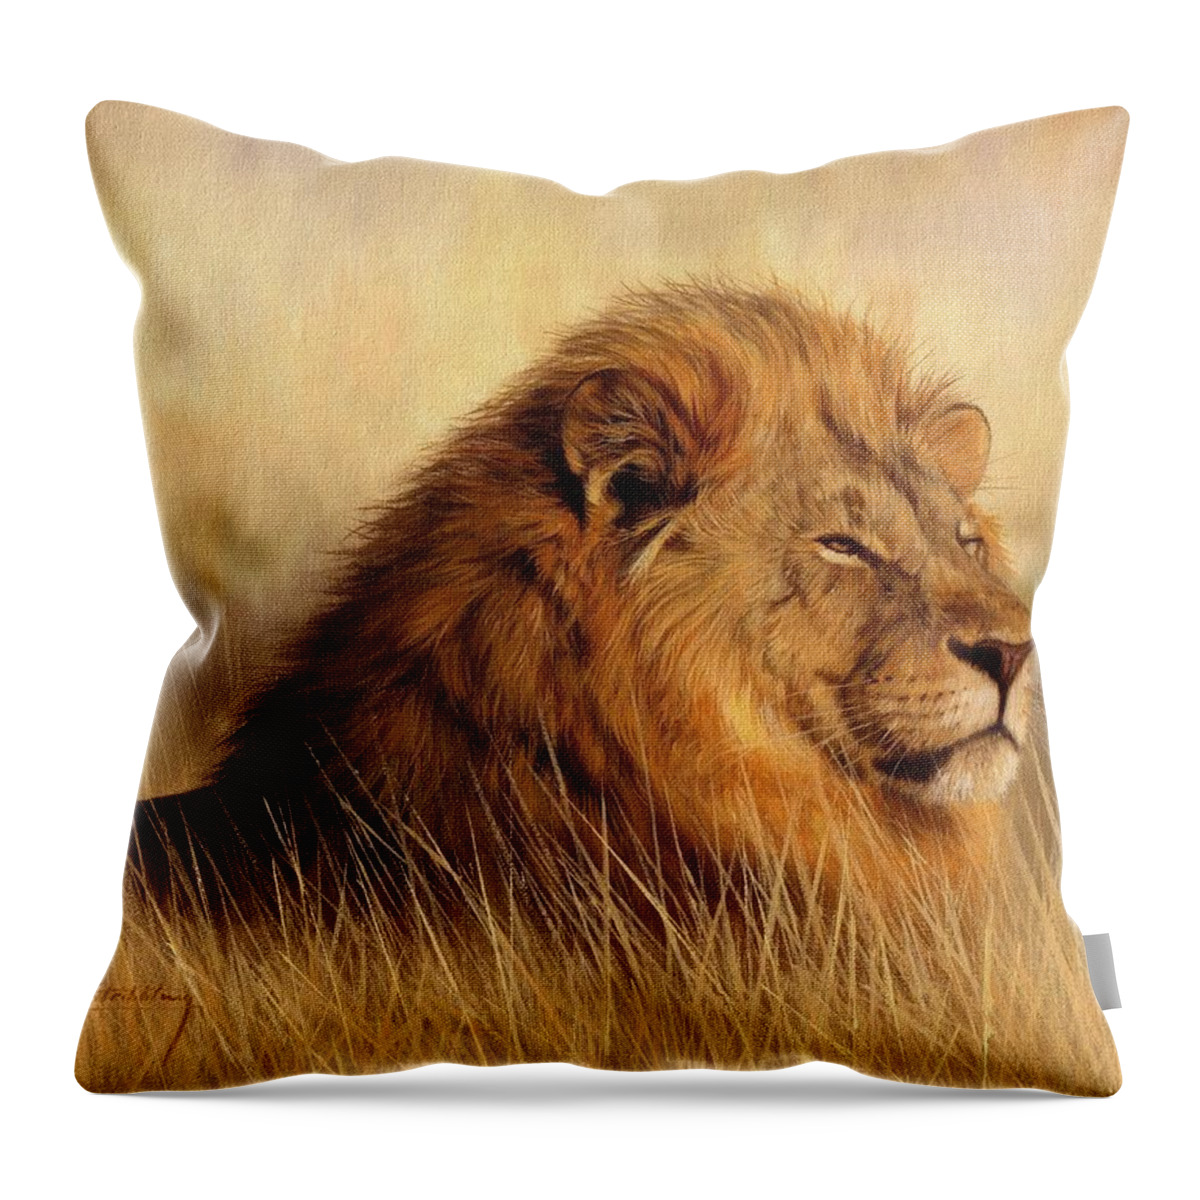 Animals Throw Pillow featuring the painting Serengeti Glow by David Stribbling